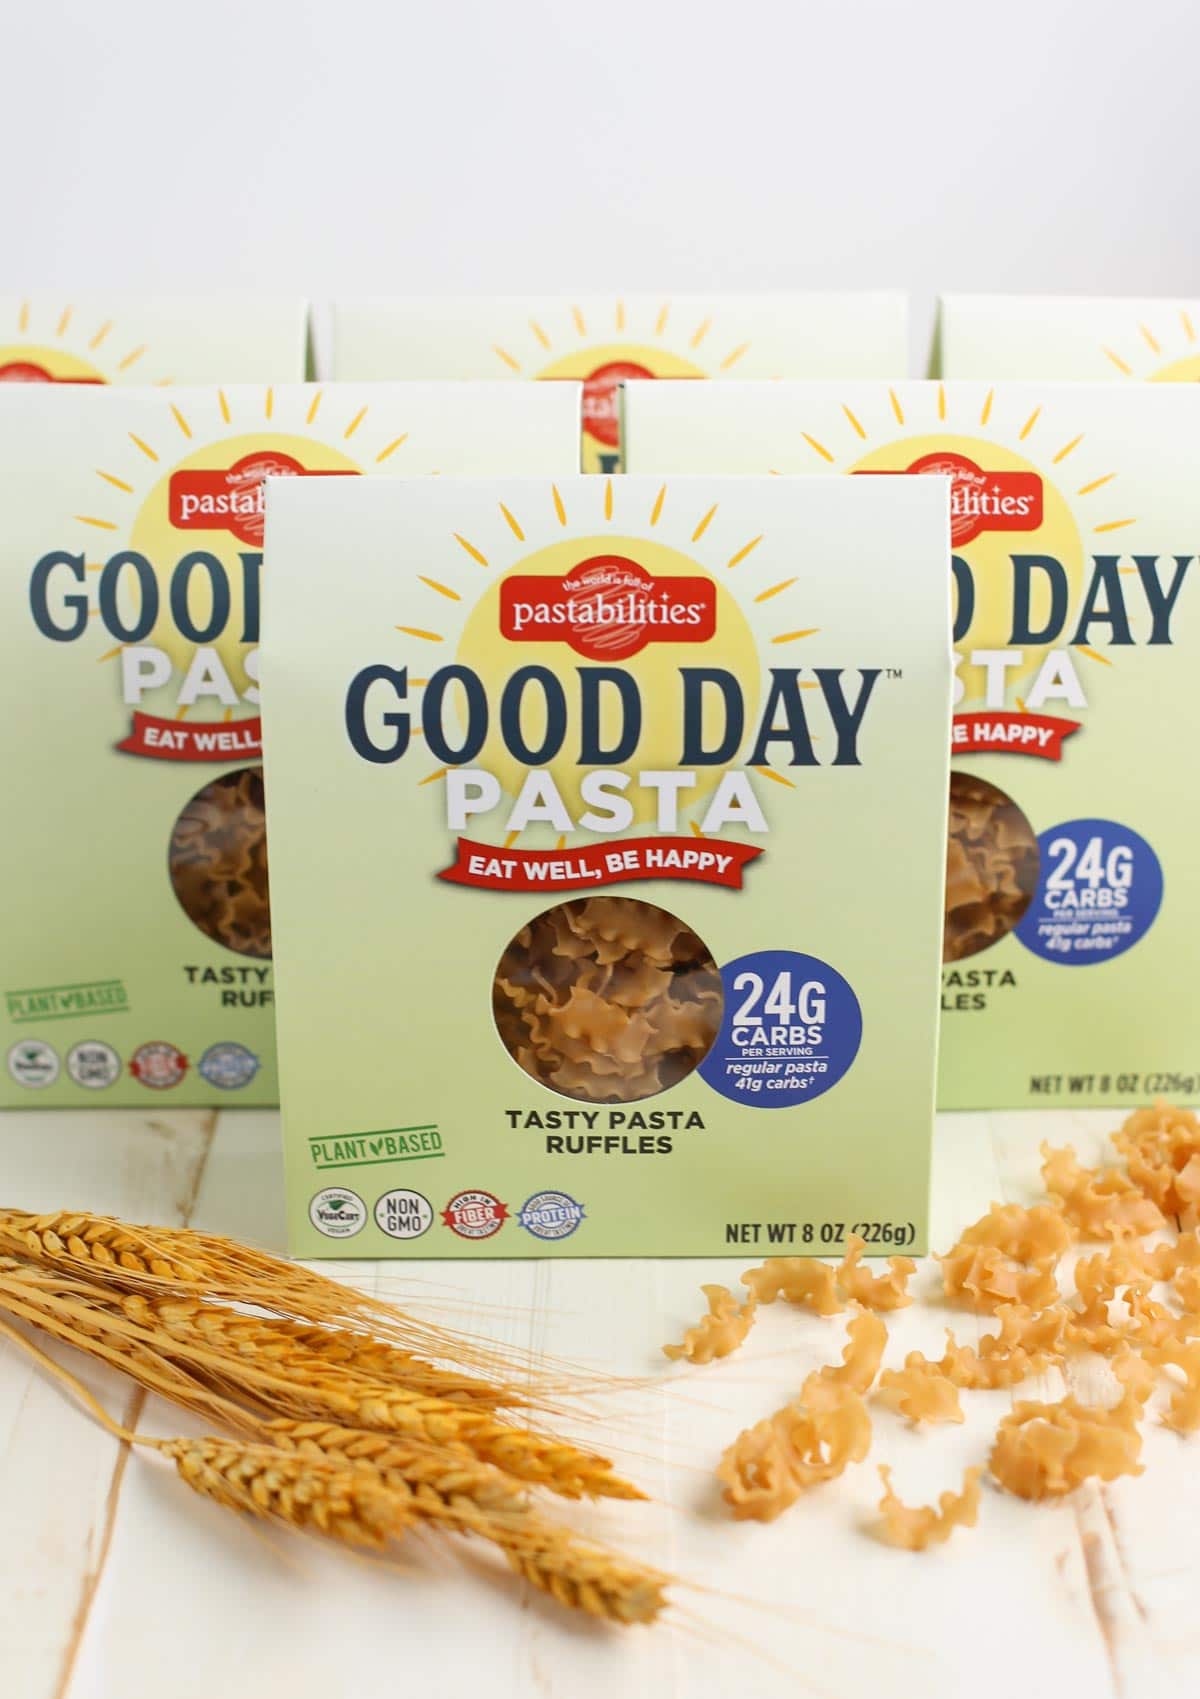 Good Day Pasta | Low Carb Keto Friendly Pasta | 42% less carbs than regular pasta | Delicious and Nutritious